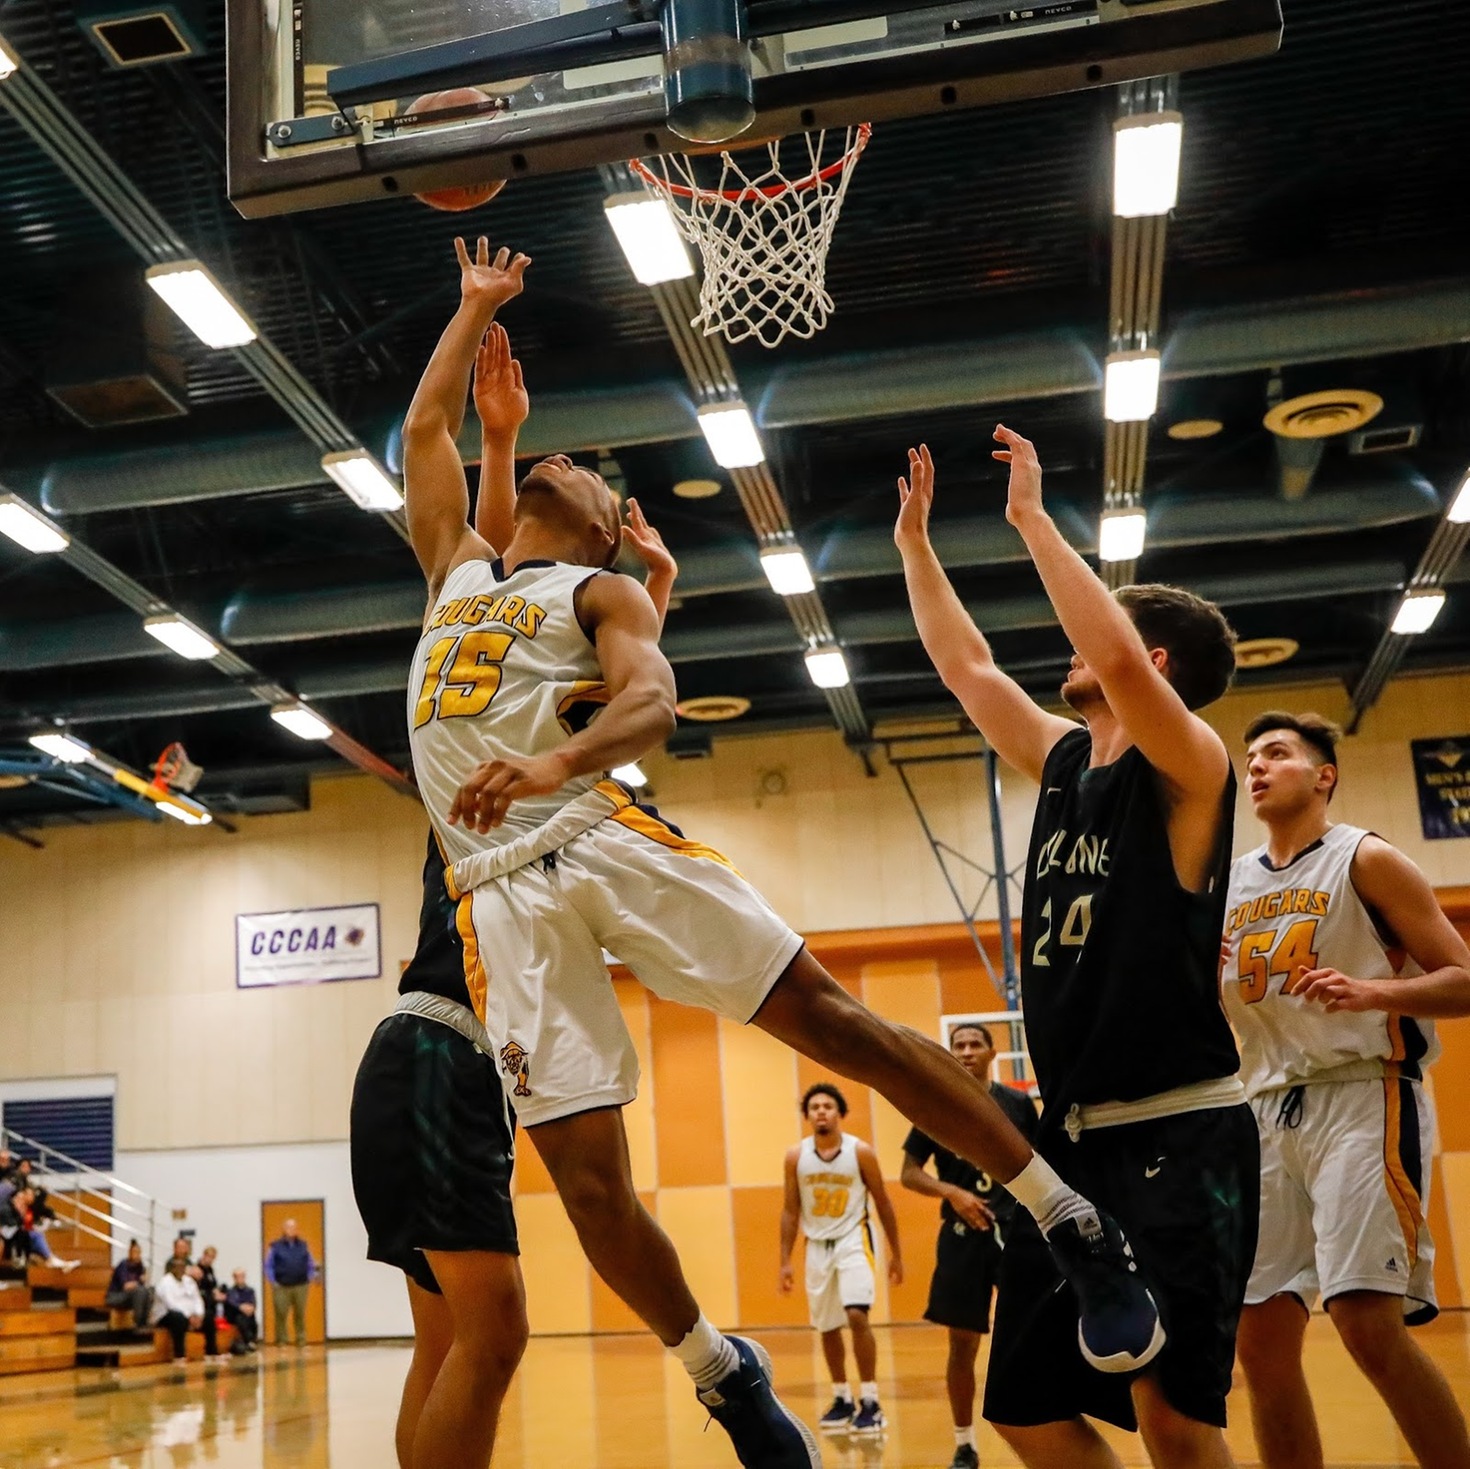 COC men's basketball vs. Ohlone College on Dec. 28, 2018 in the Cougar Cage.